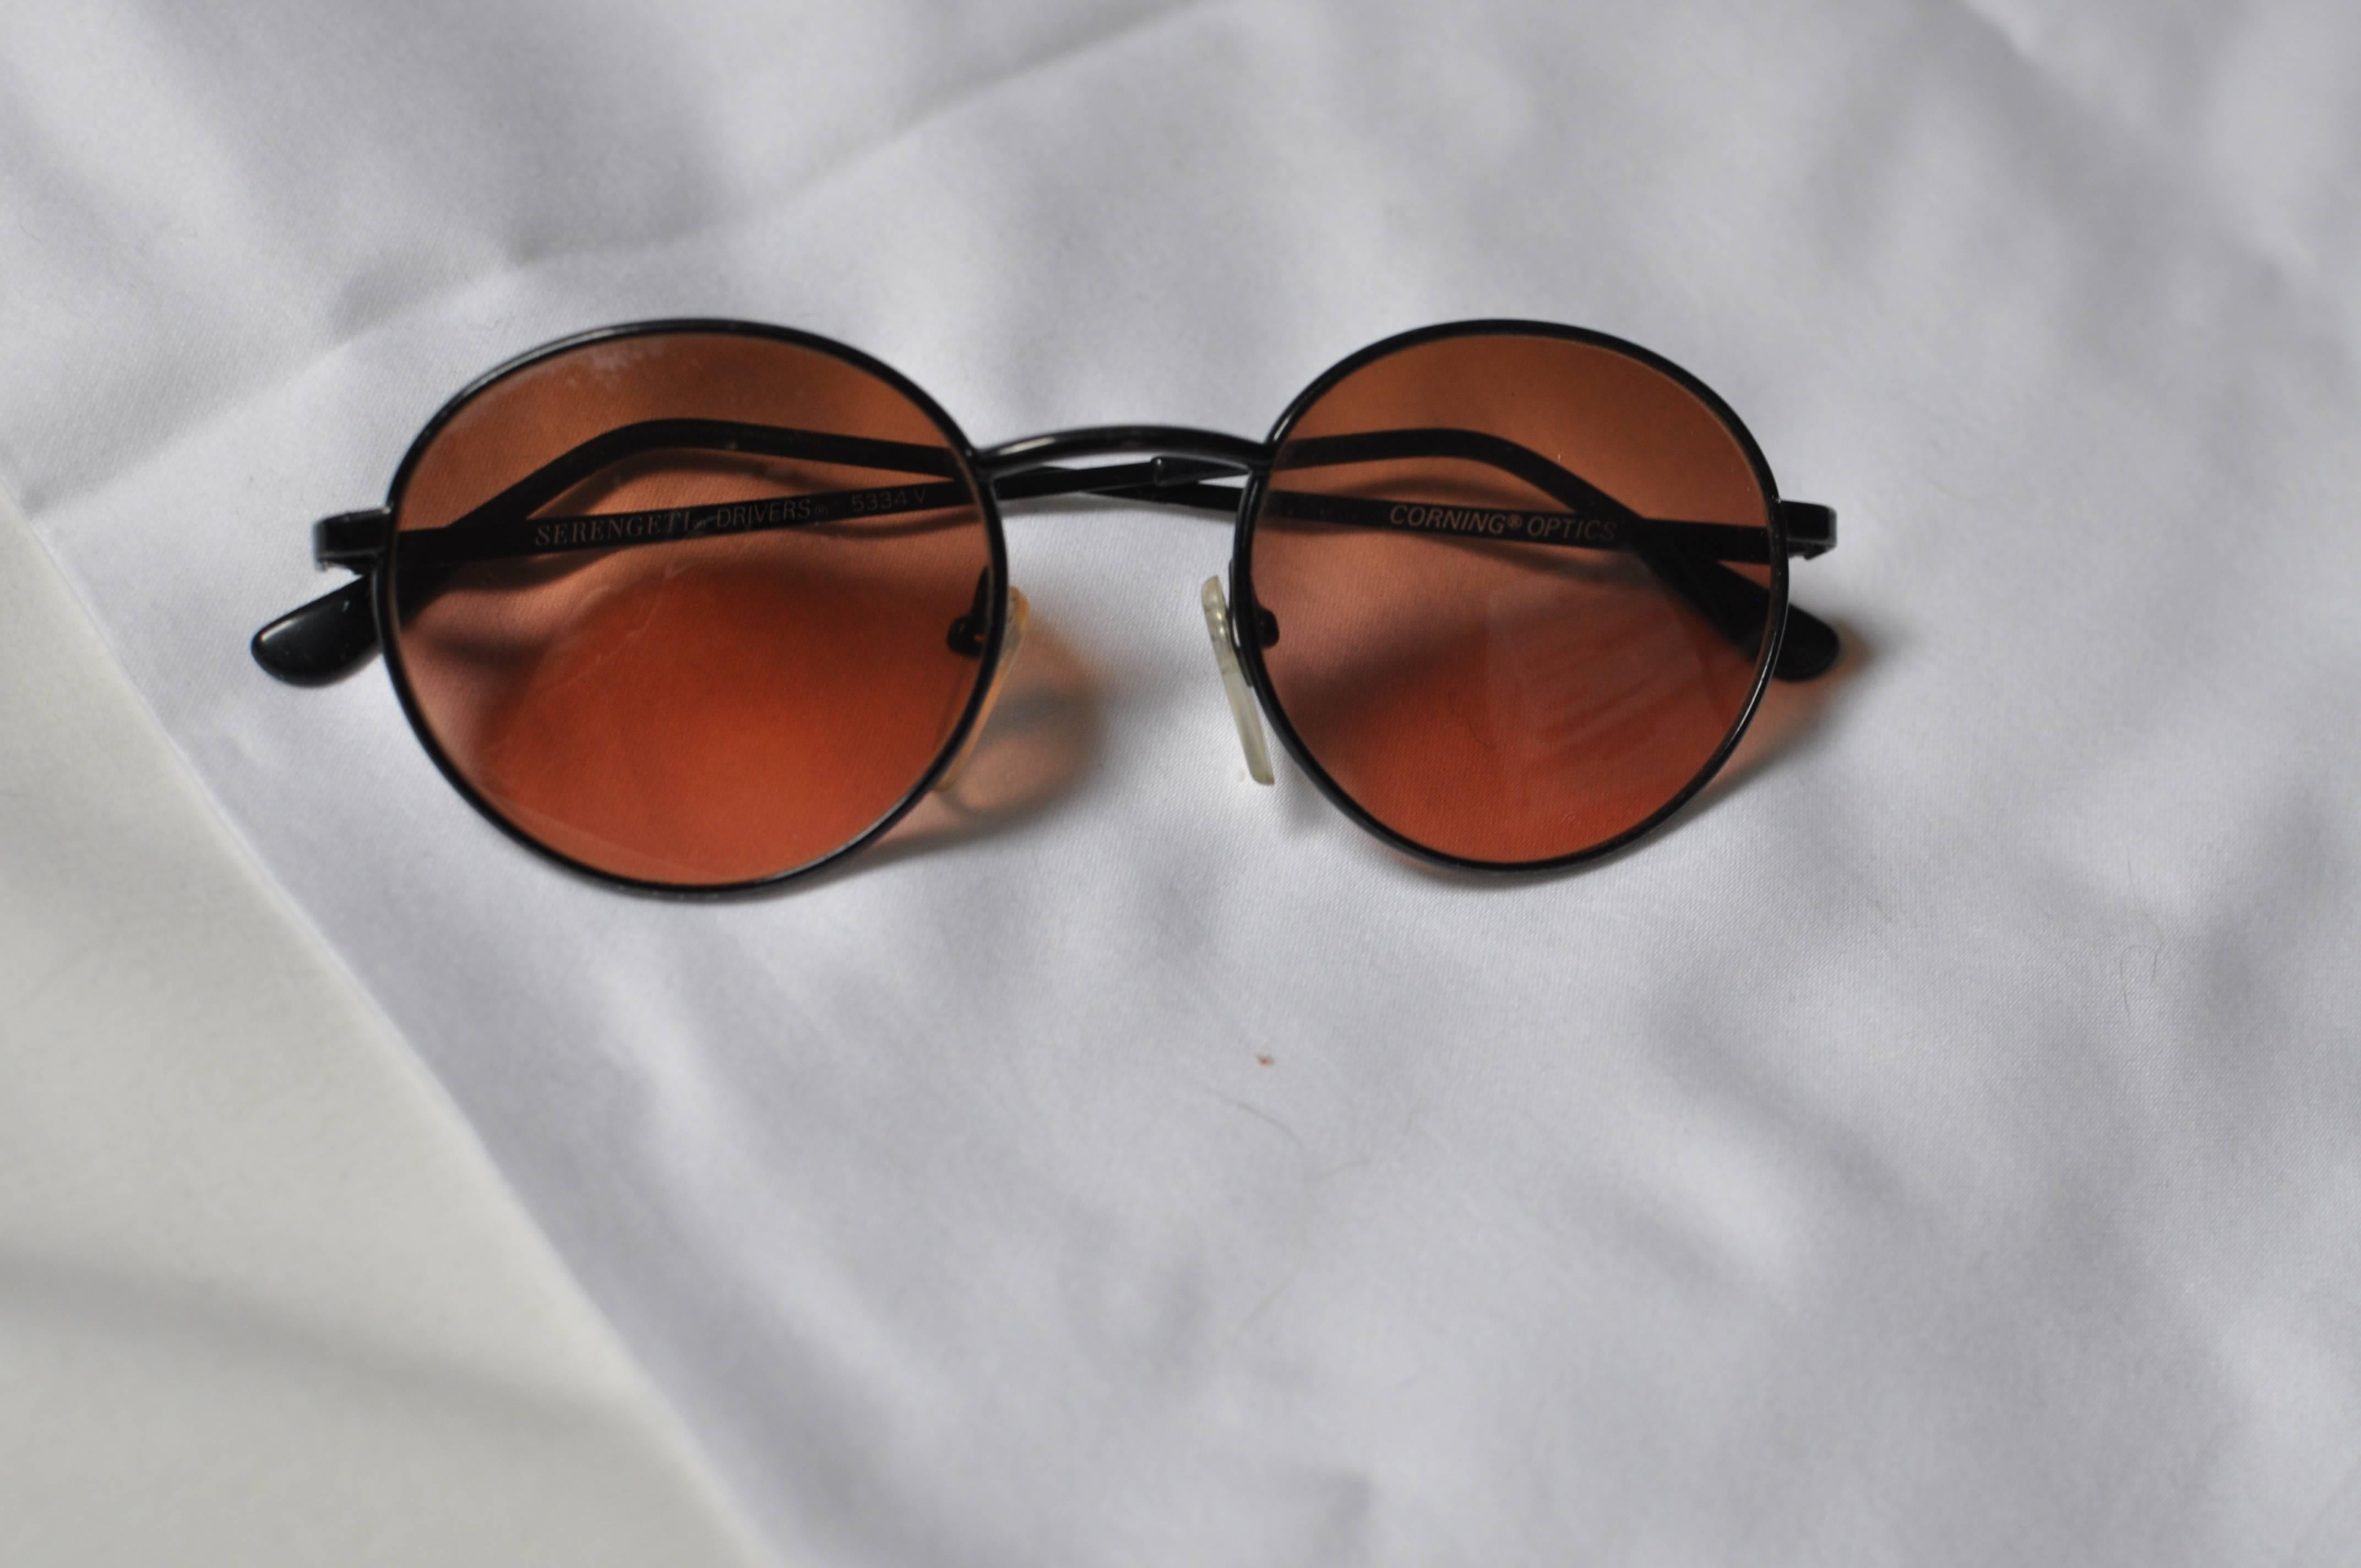 Black metal frames with Corning Optics rose colored lenses, and non-slip nose pads. In very good condition and in original case.